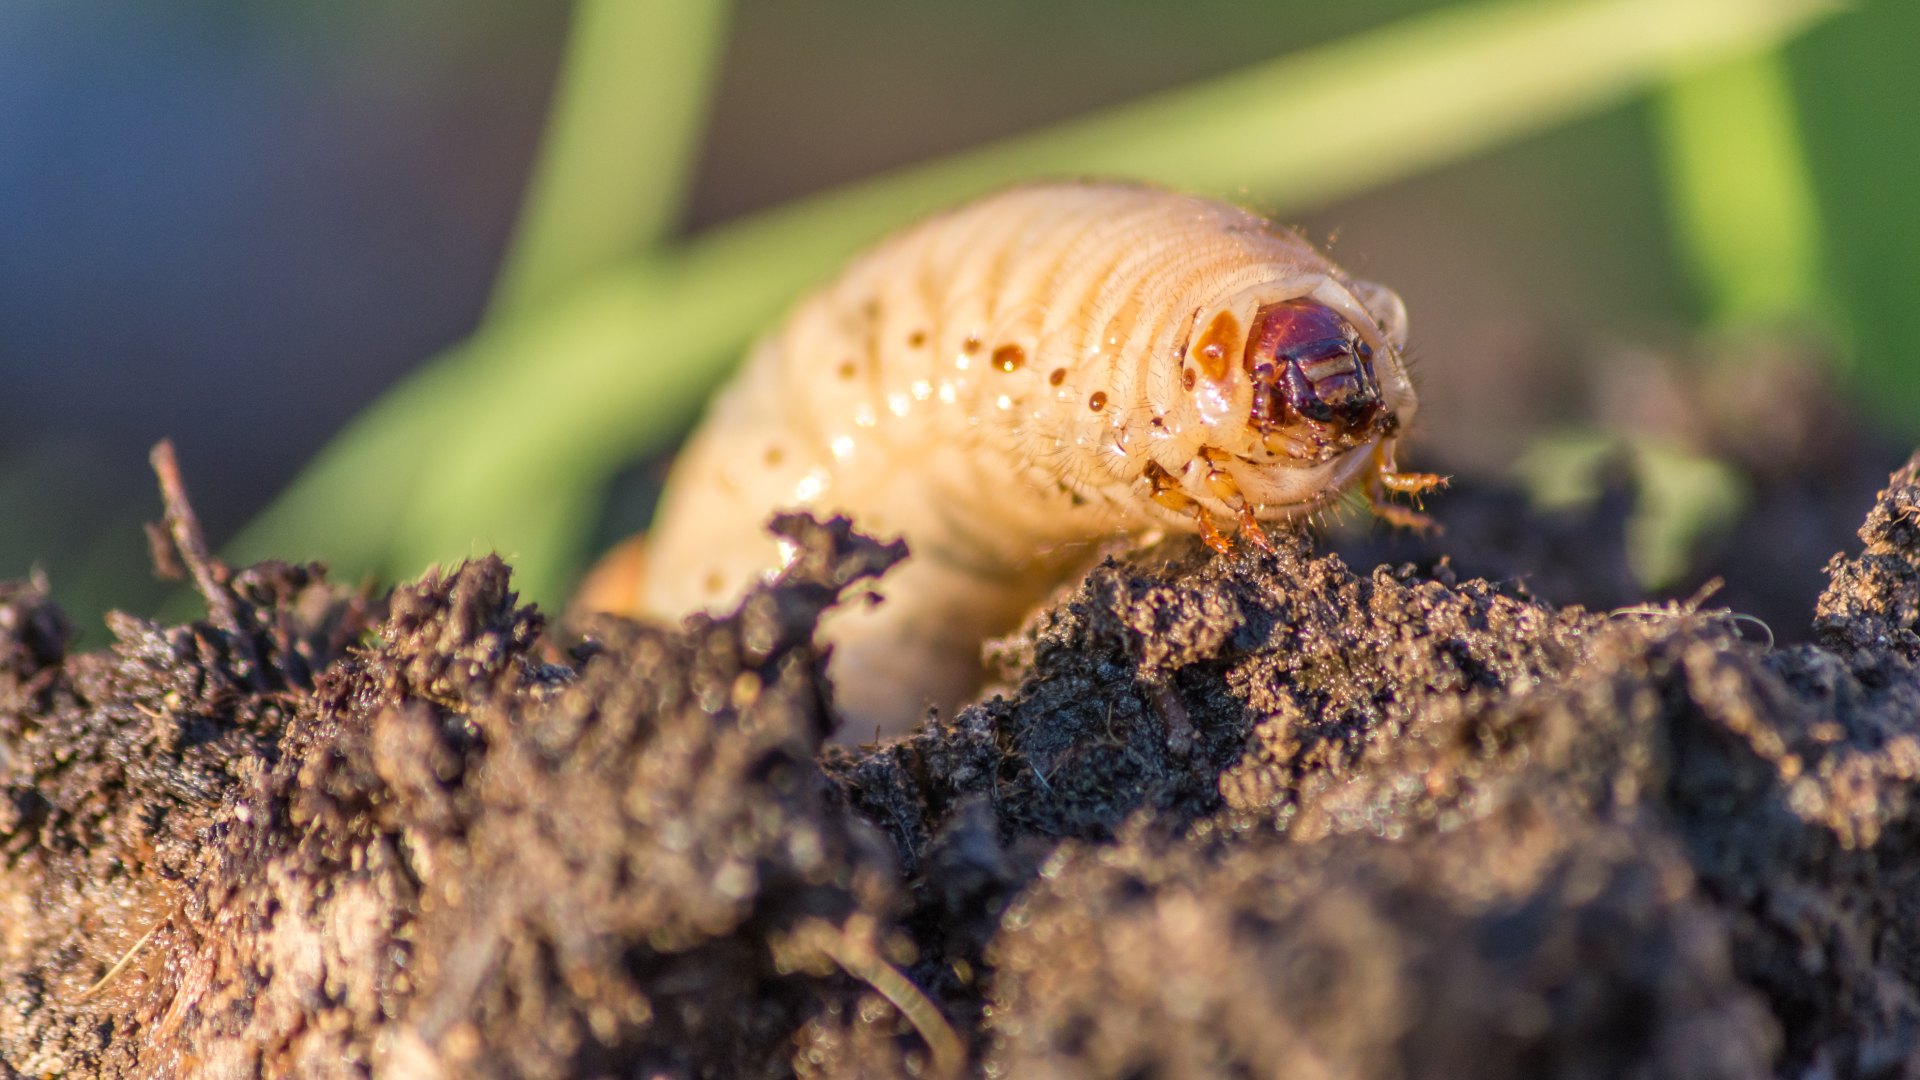 Preventative Grub Control Could Protect Your Lawn’s Health & Save Your Sanity!